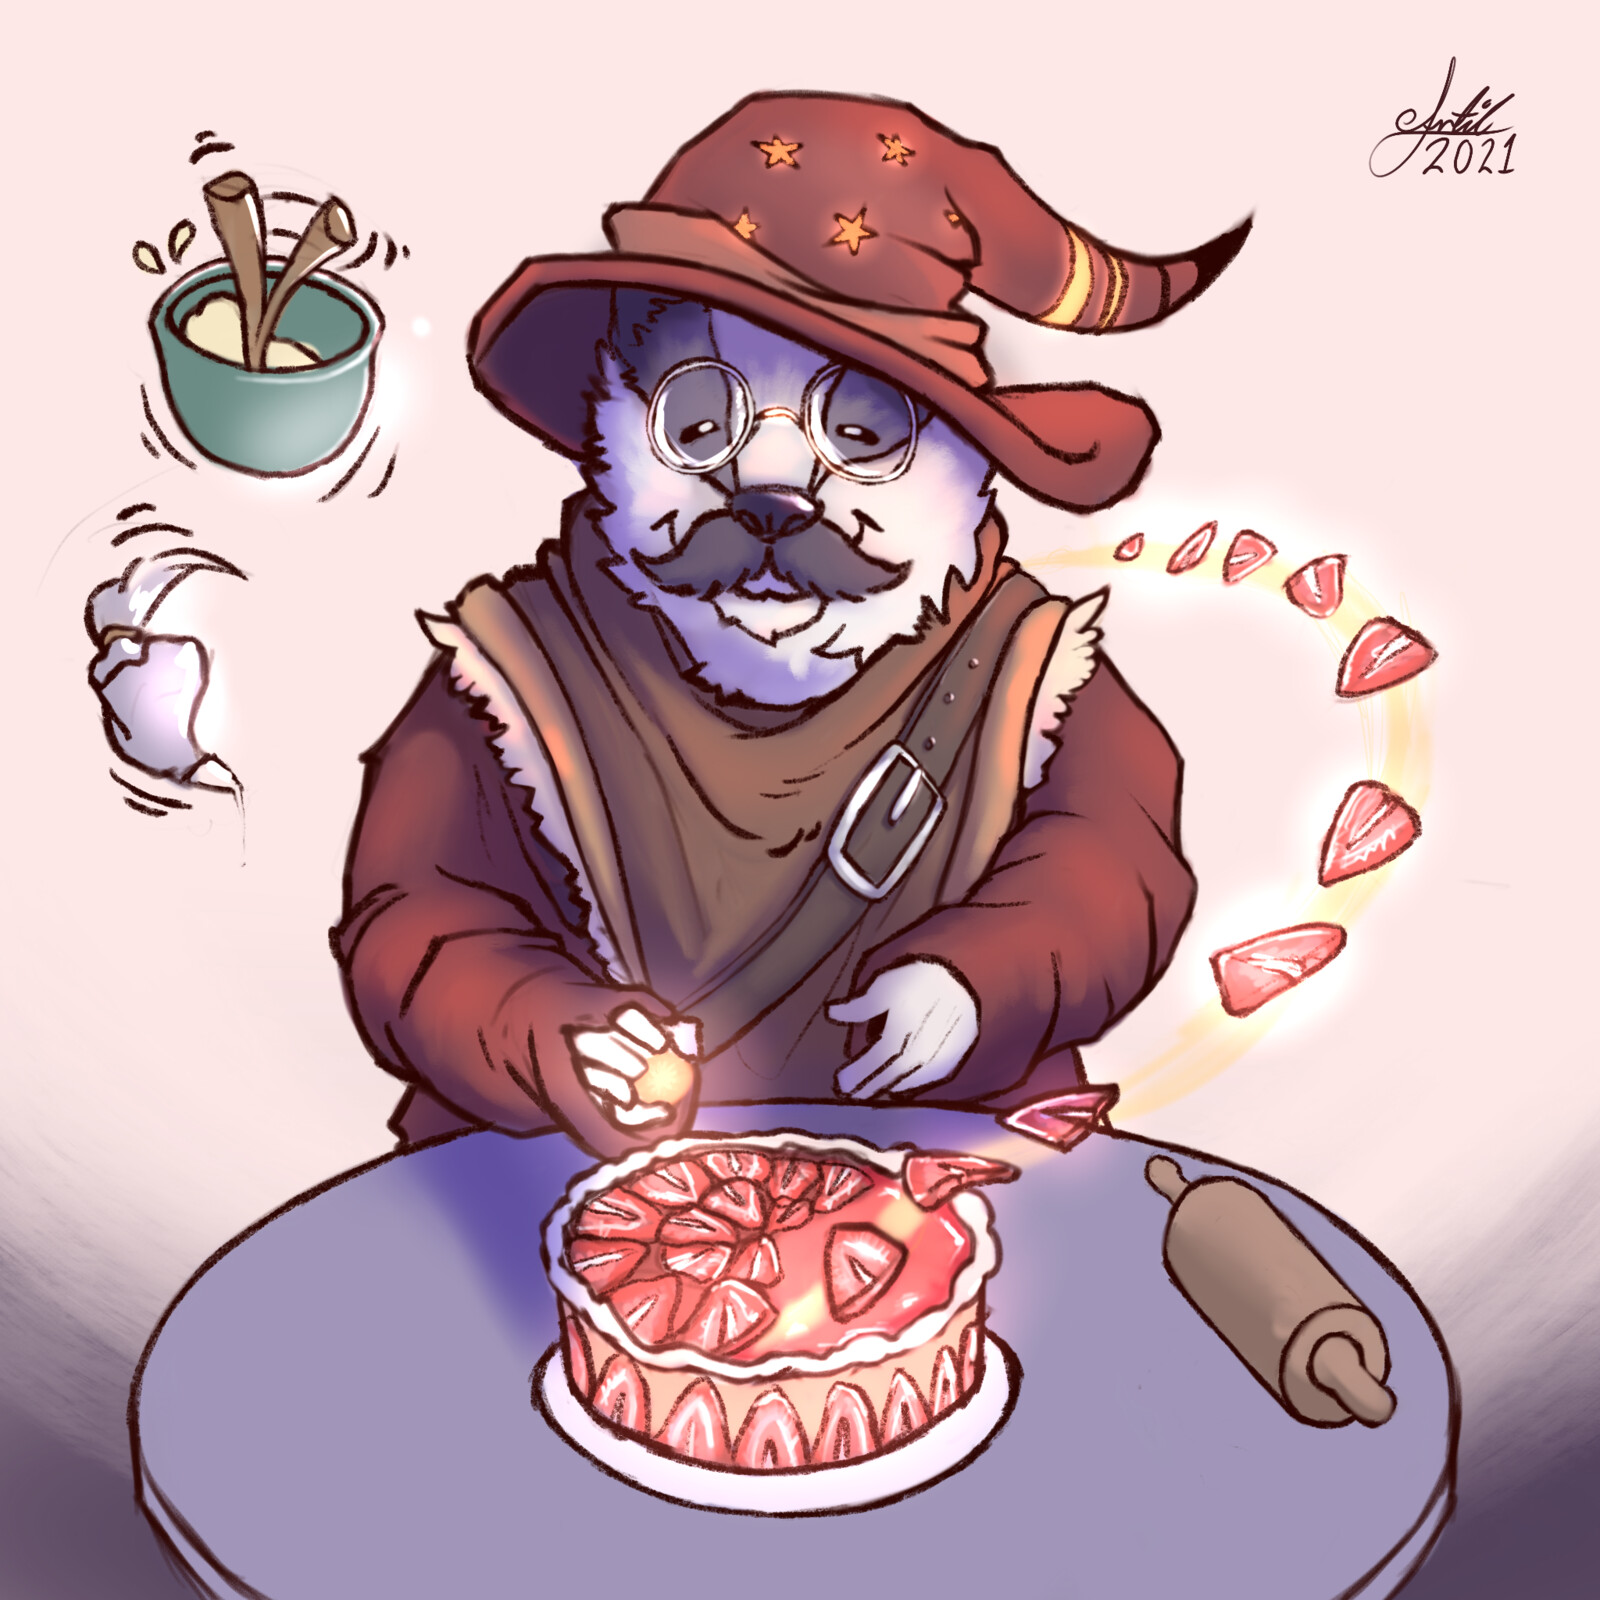 Wizardly bakeries